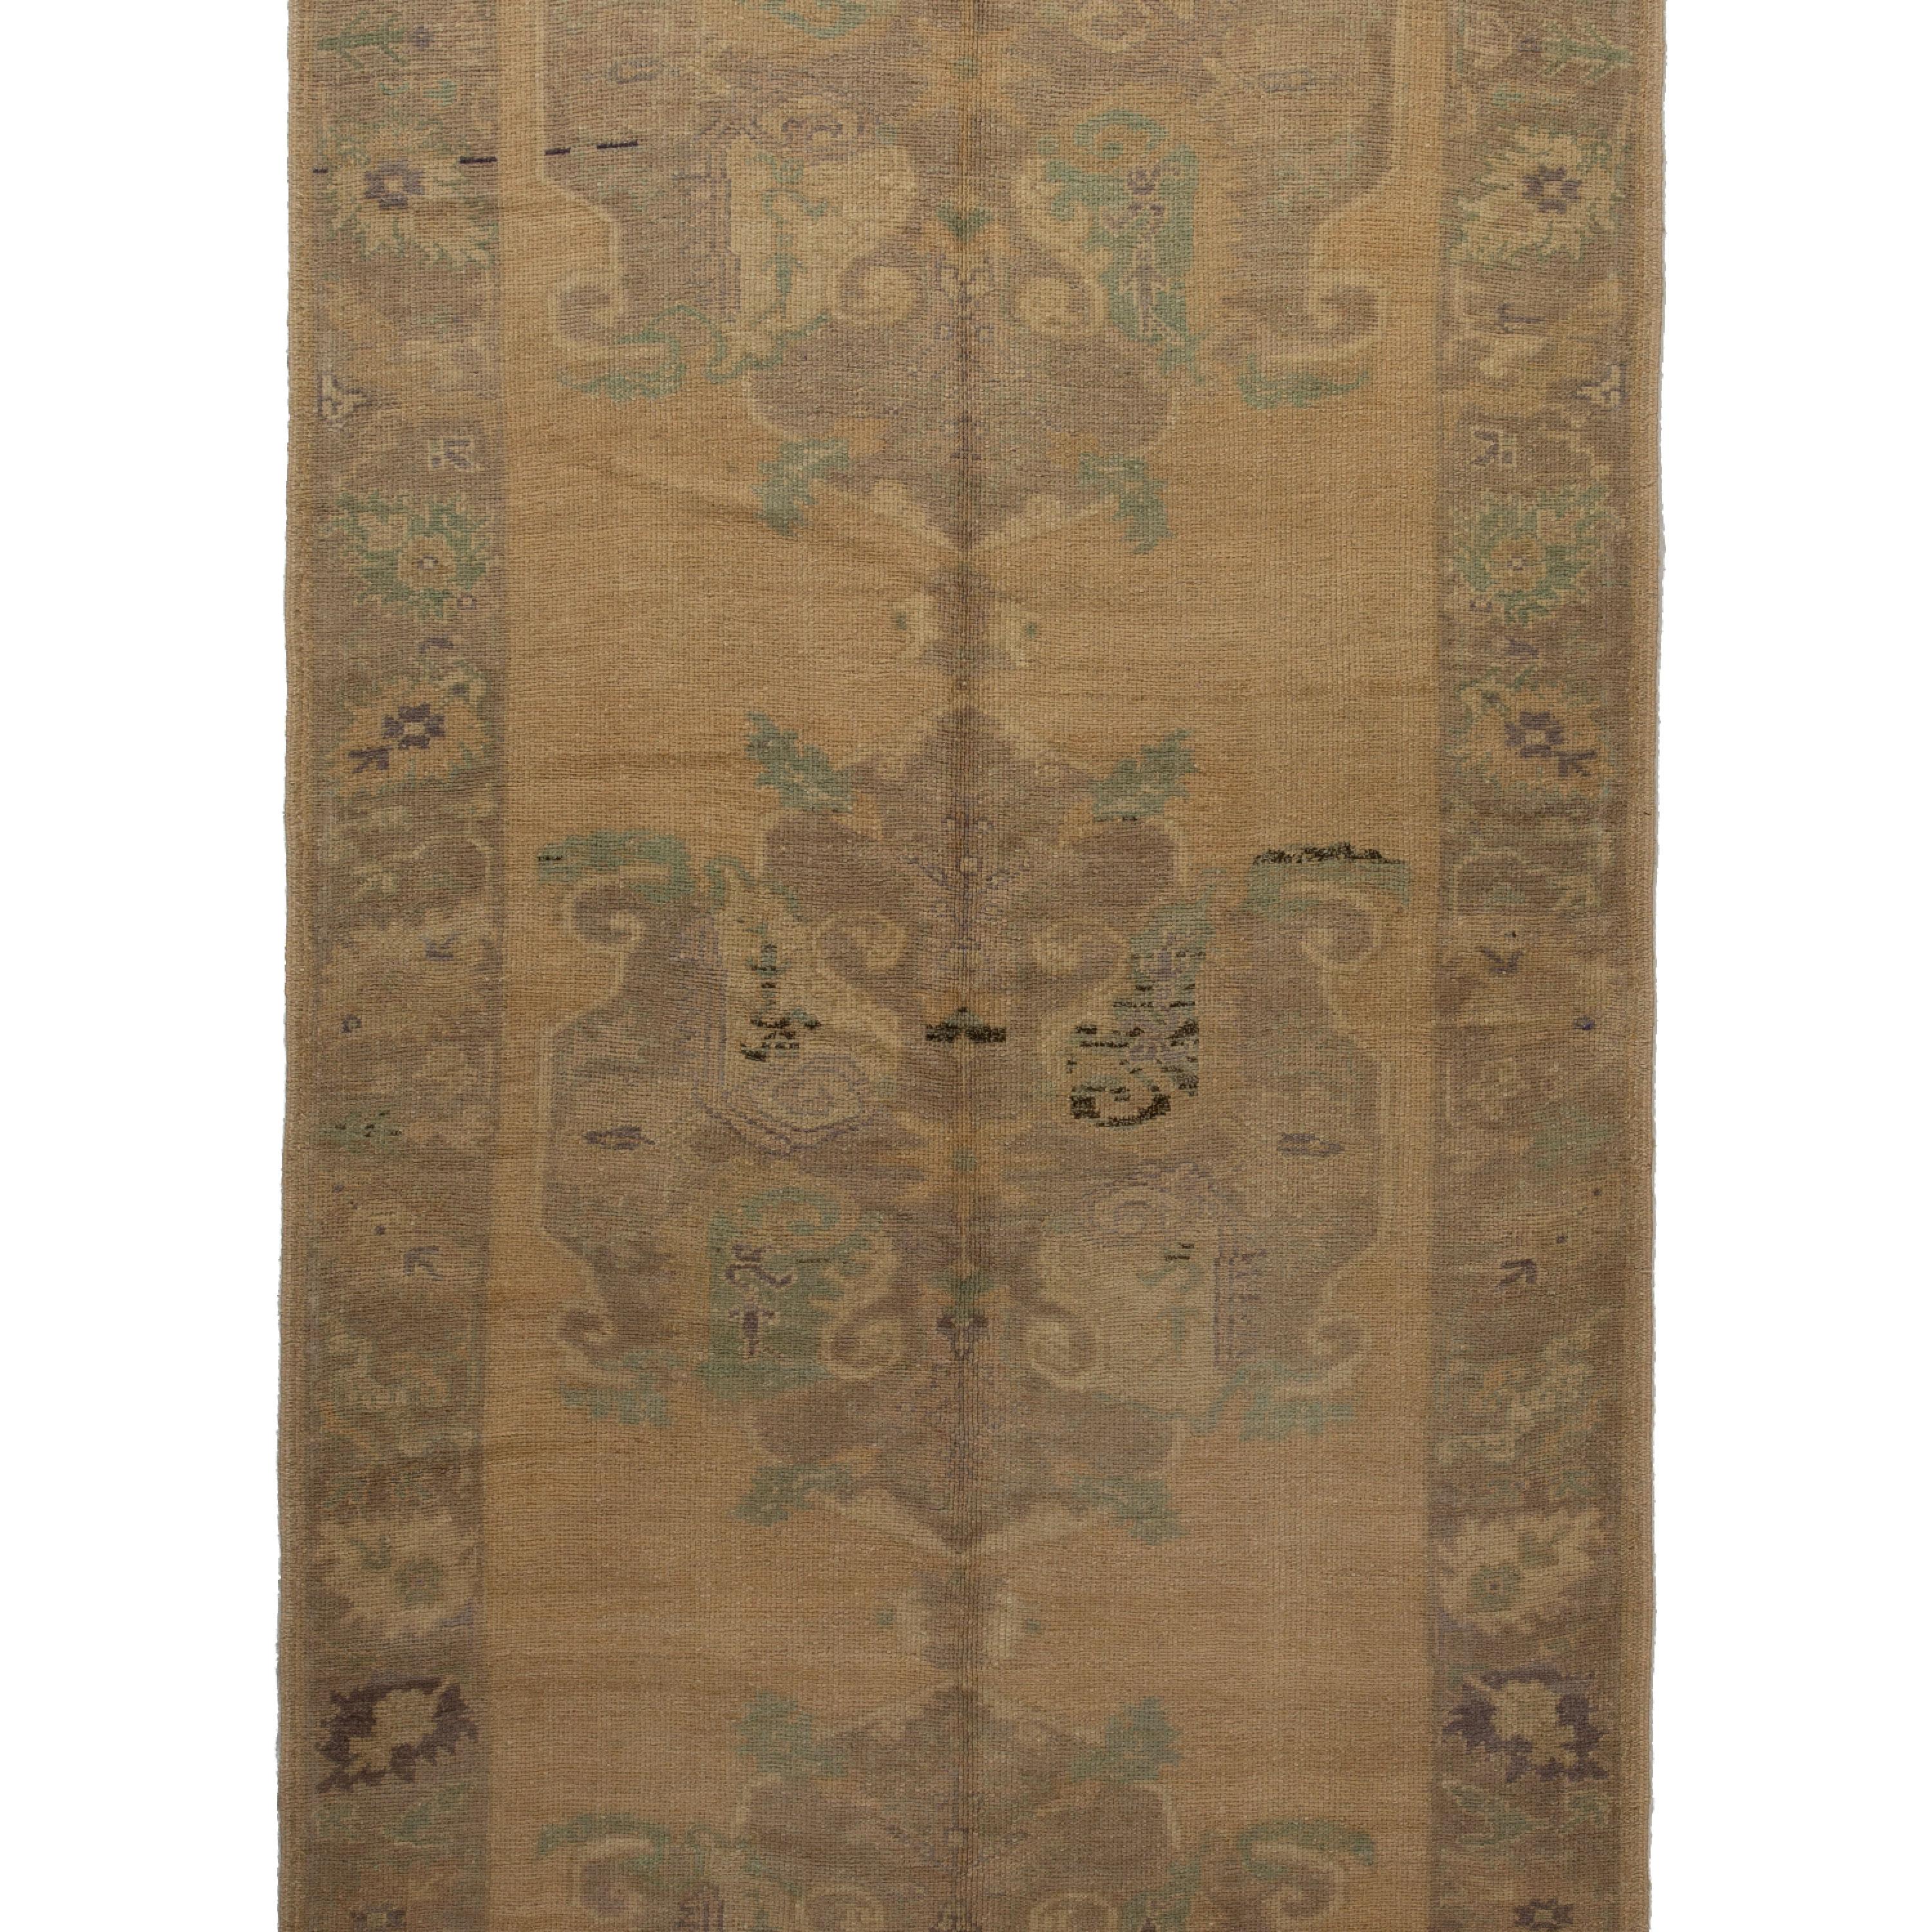 Hand-knotted in Turkey, this Vintage Fresco Rug - 4'9